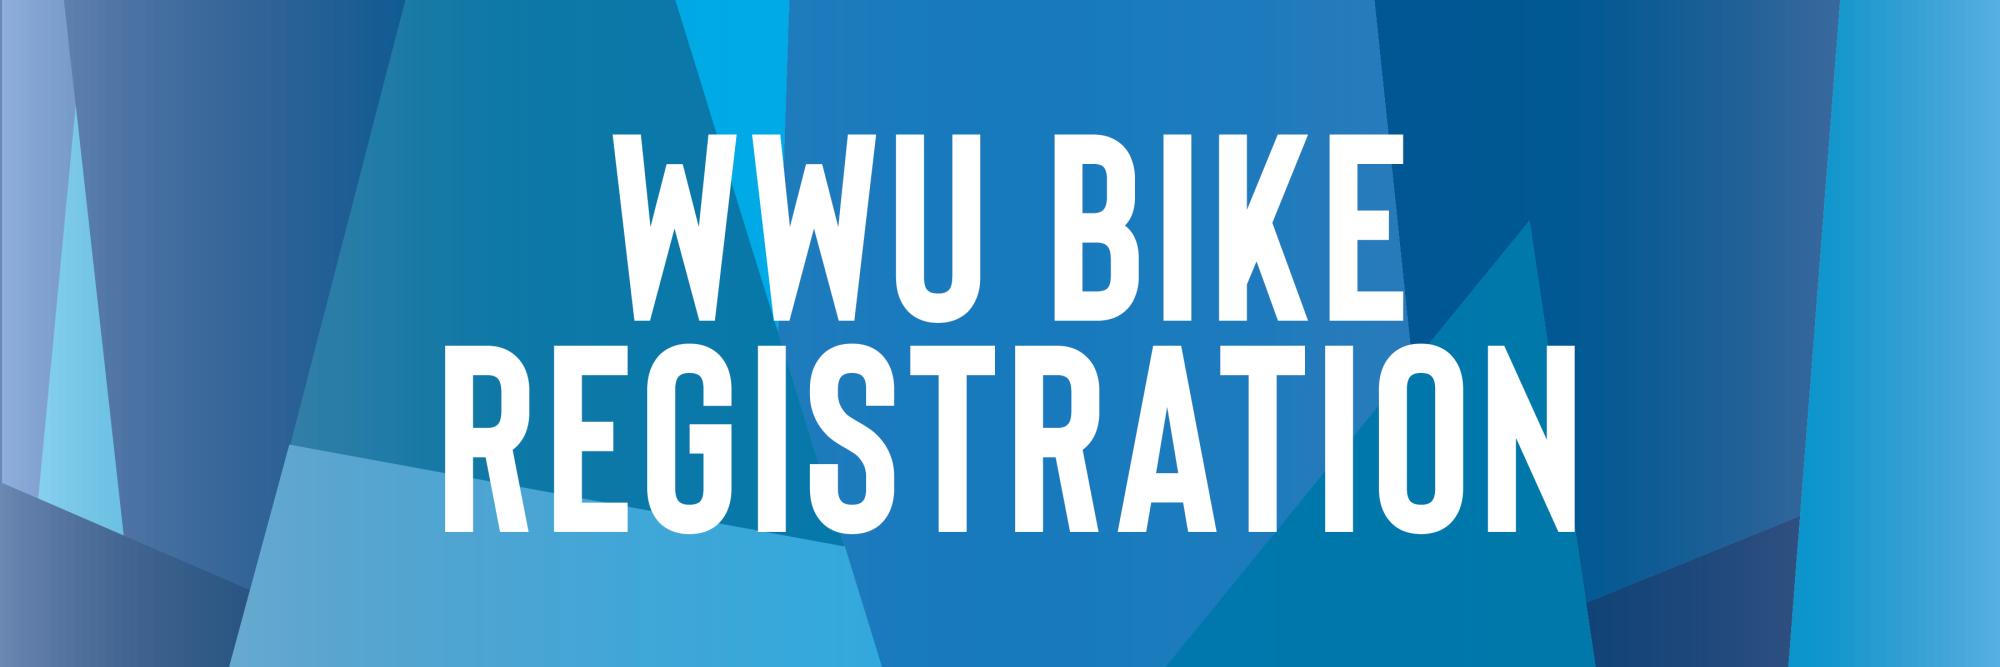 Banner with blue geometric shapes and wwu bike registration written on it